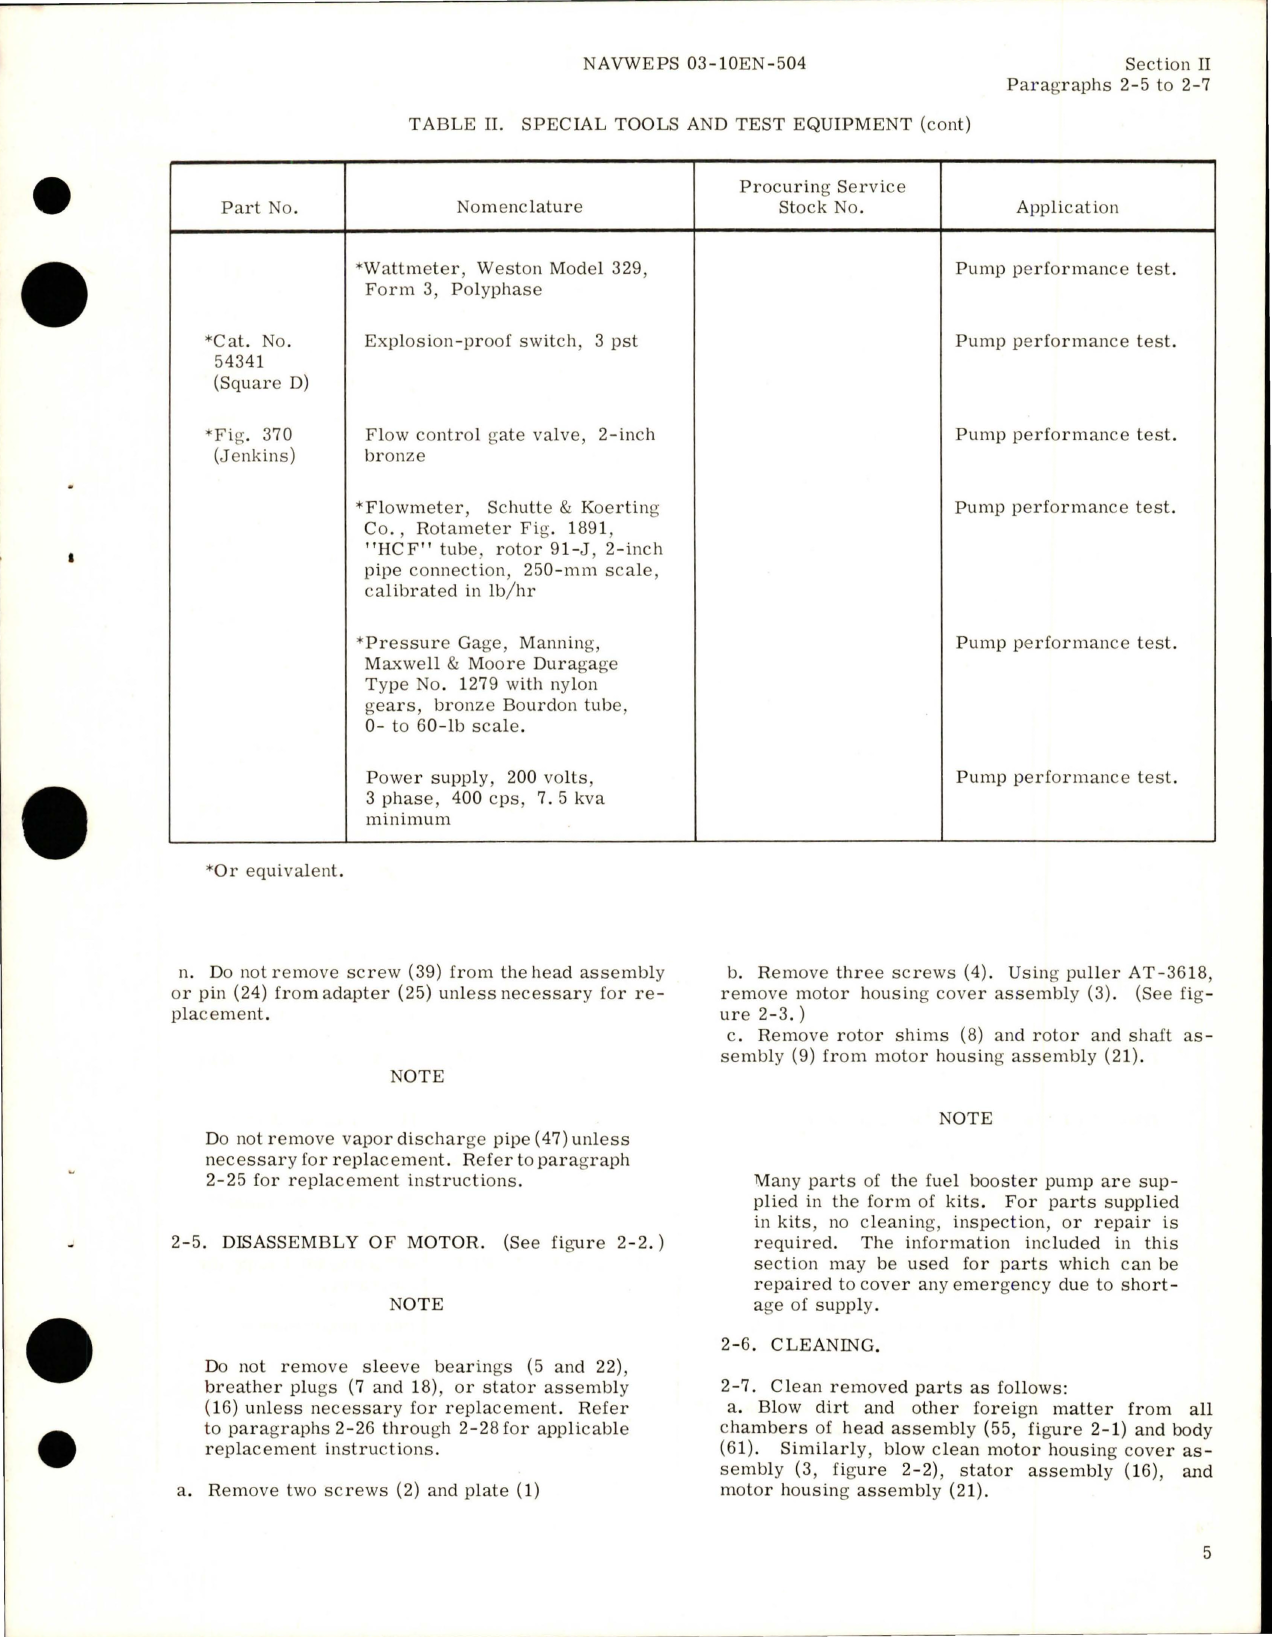 Sample page 7 from AirCorps Library document: Overhaul Instructions for Fuel Booster Pump - Models 64-1063-1, 64-1063-11, and 641063-11A